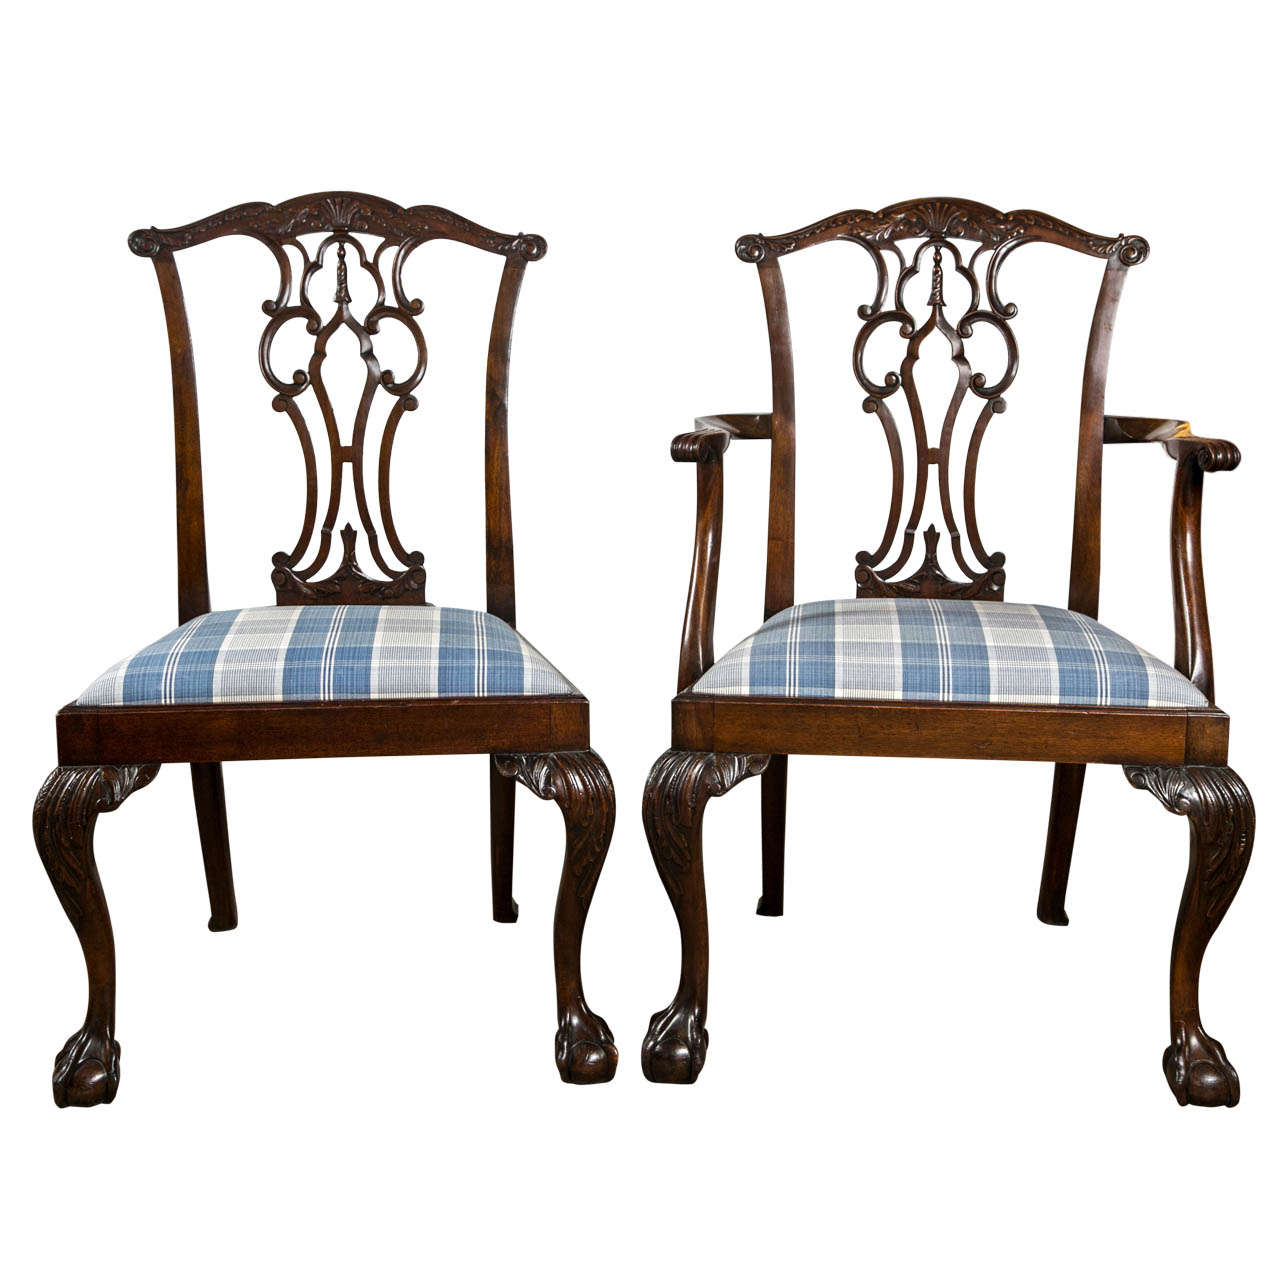 Set Of Eight Chippendale Dining Chairs With Ball And Claw Feet At 1stdibs,Grilled Corn On The Cob Veggies